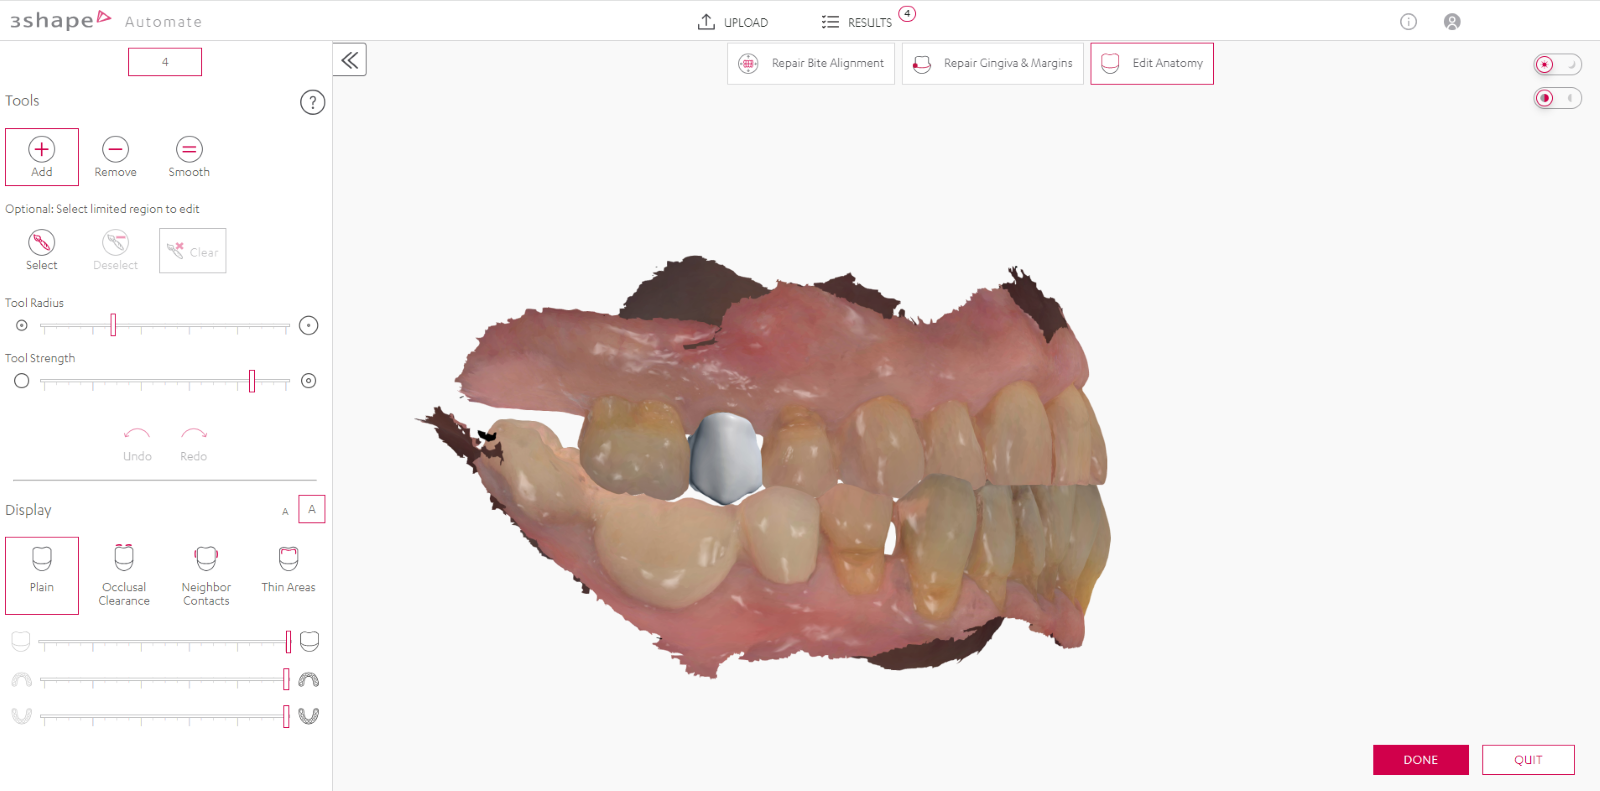 A close-up of a denture

Description automatically generated